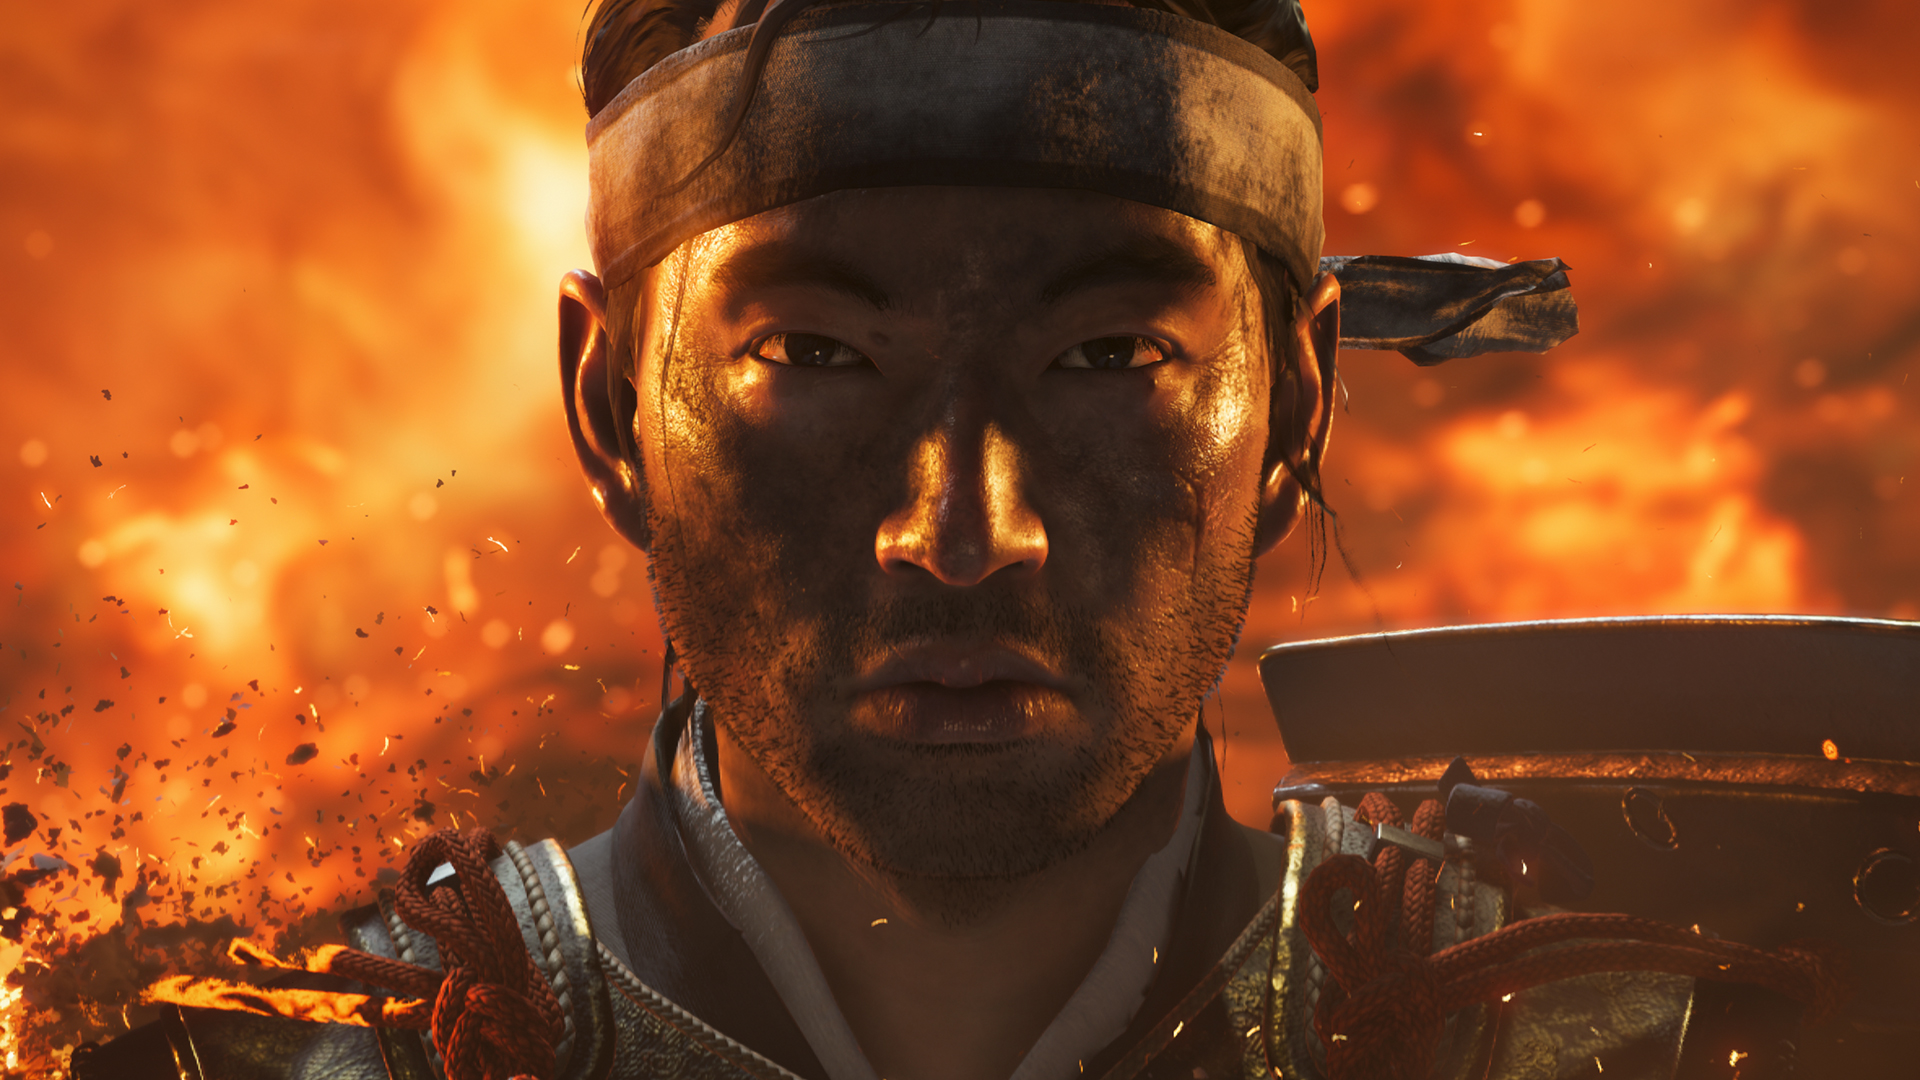 ghost of tsushima ps4 age rating